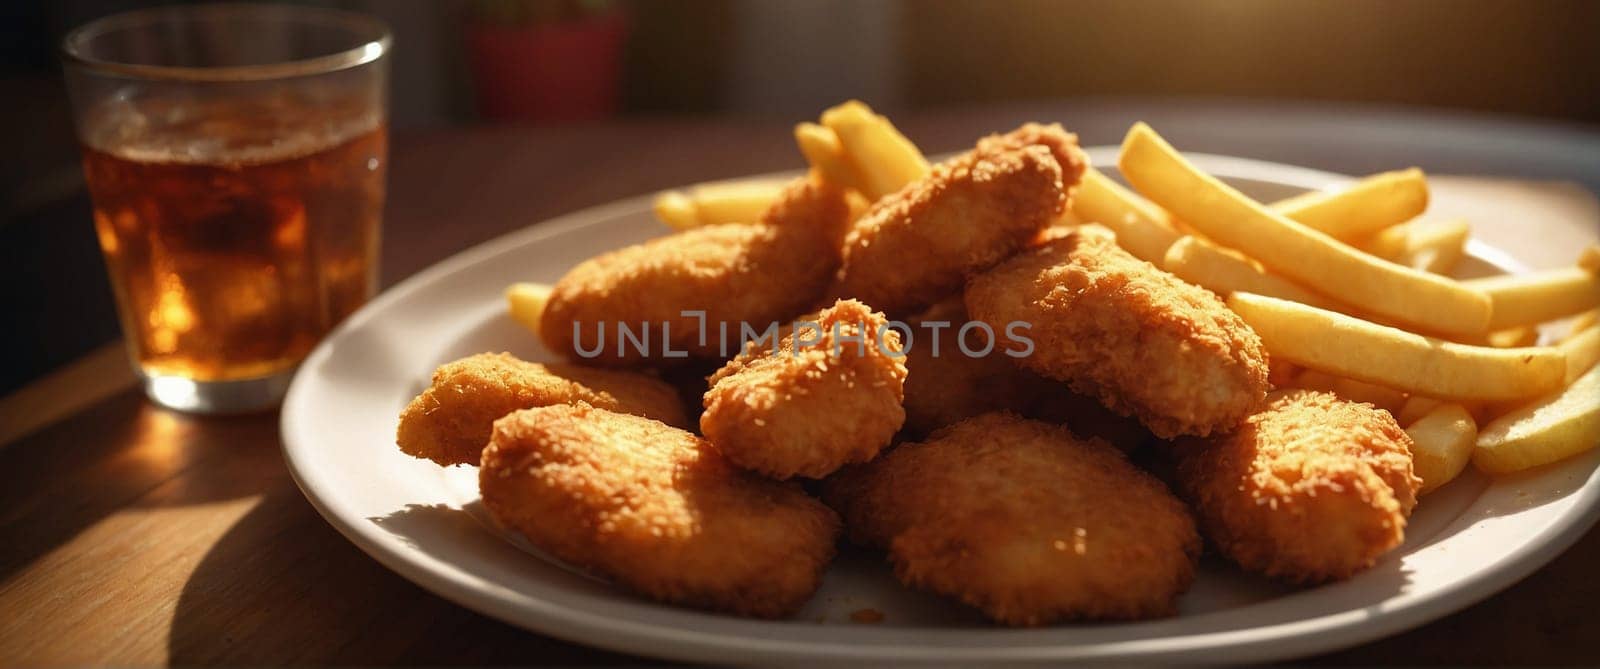 plate of chicken nuggets and french fries, wide horizontal ratio, blurred background bokeh effect, by verbano